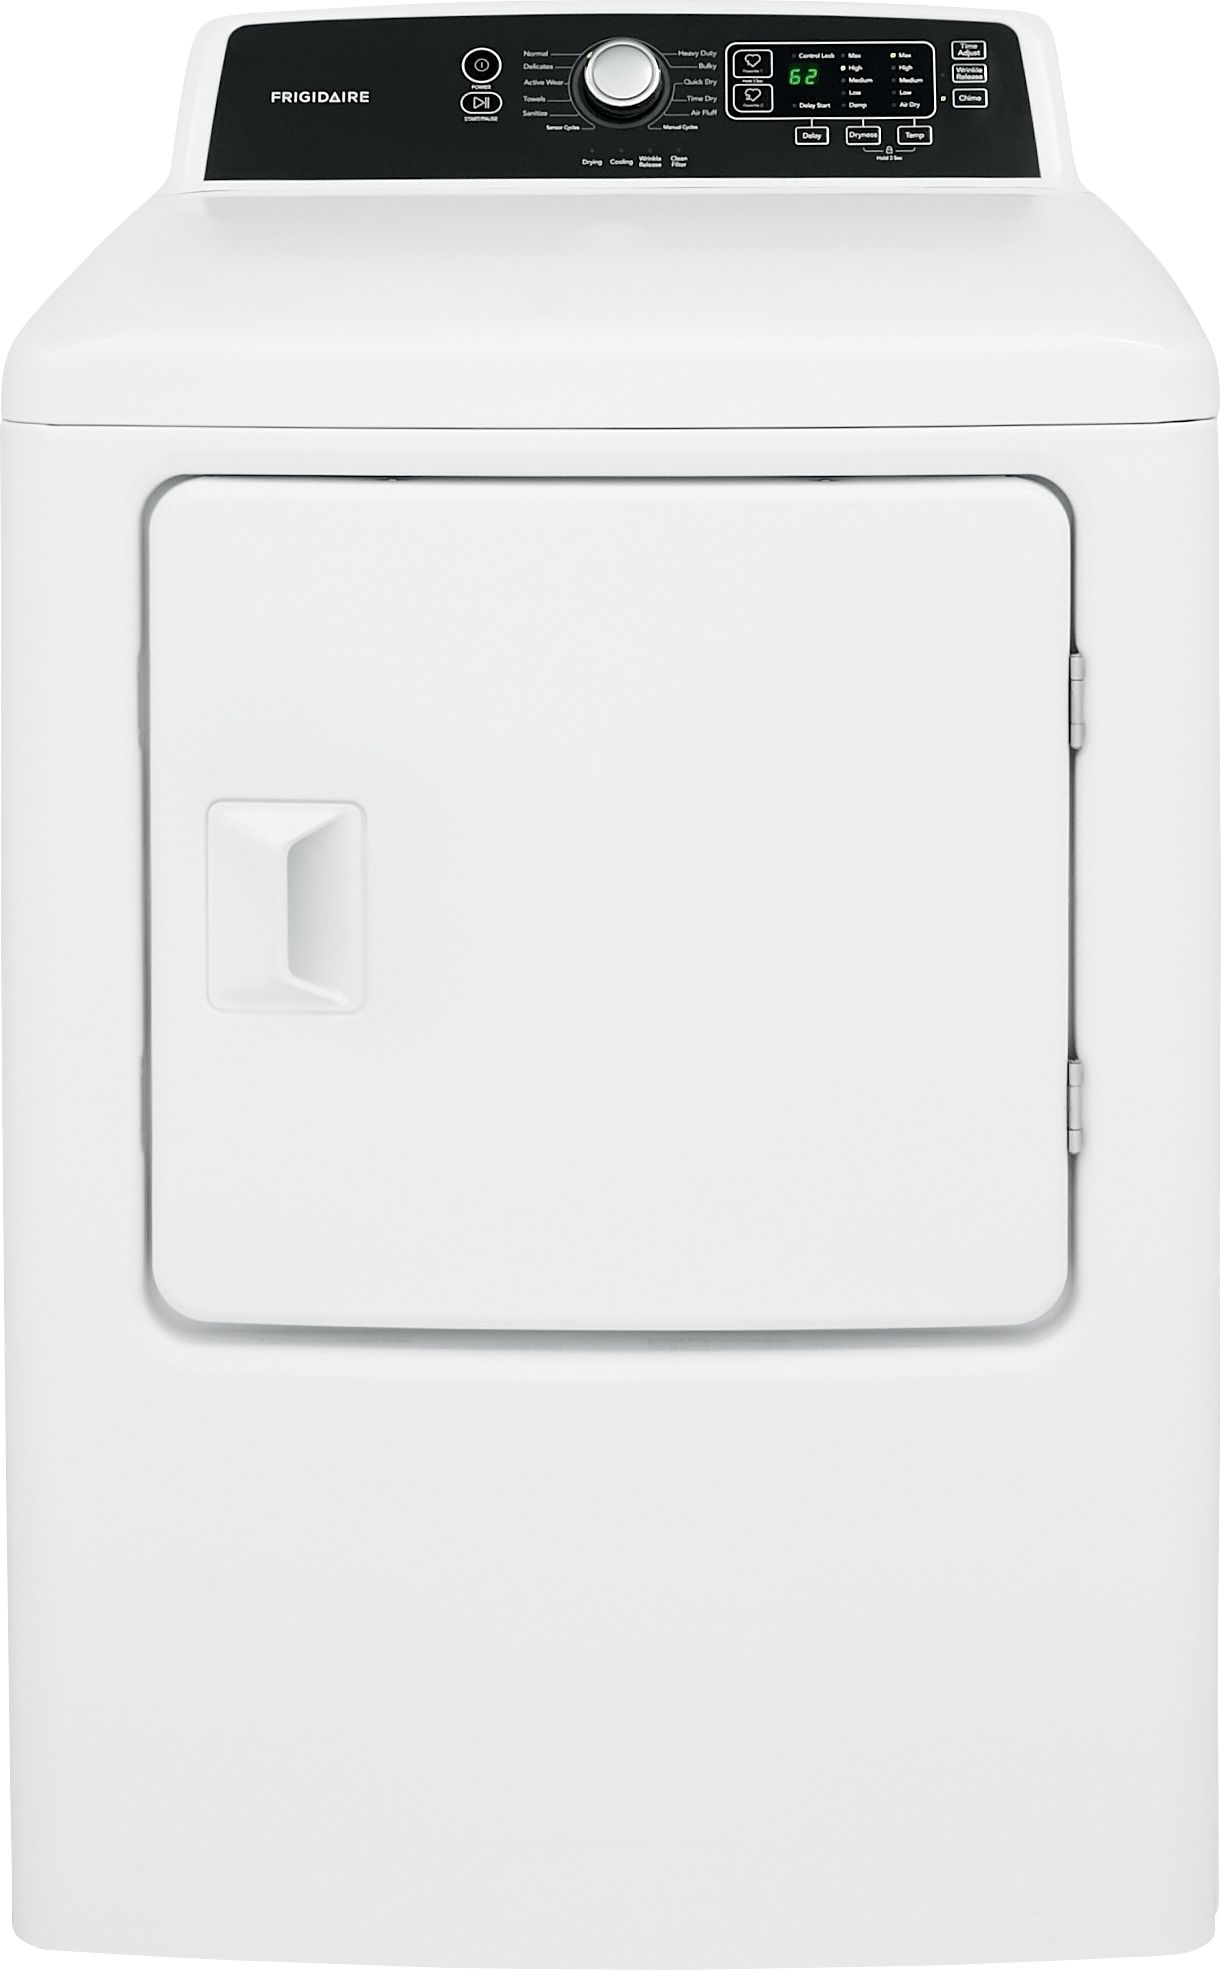 Frigidaire® 6.7 Cu. Ft. Classic White Free Standing Electric Dryer